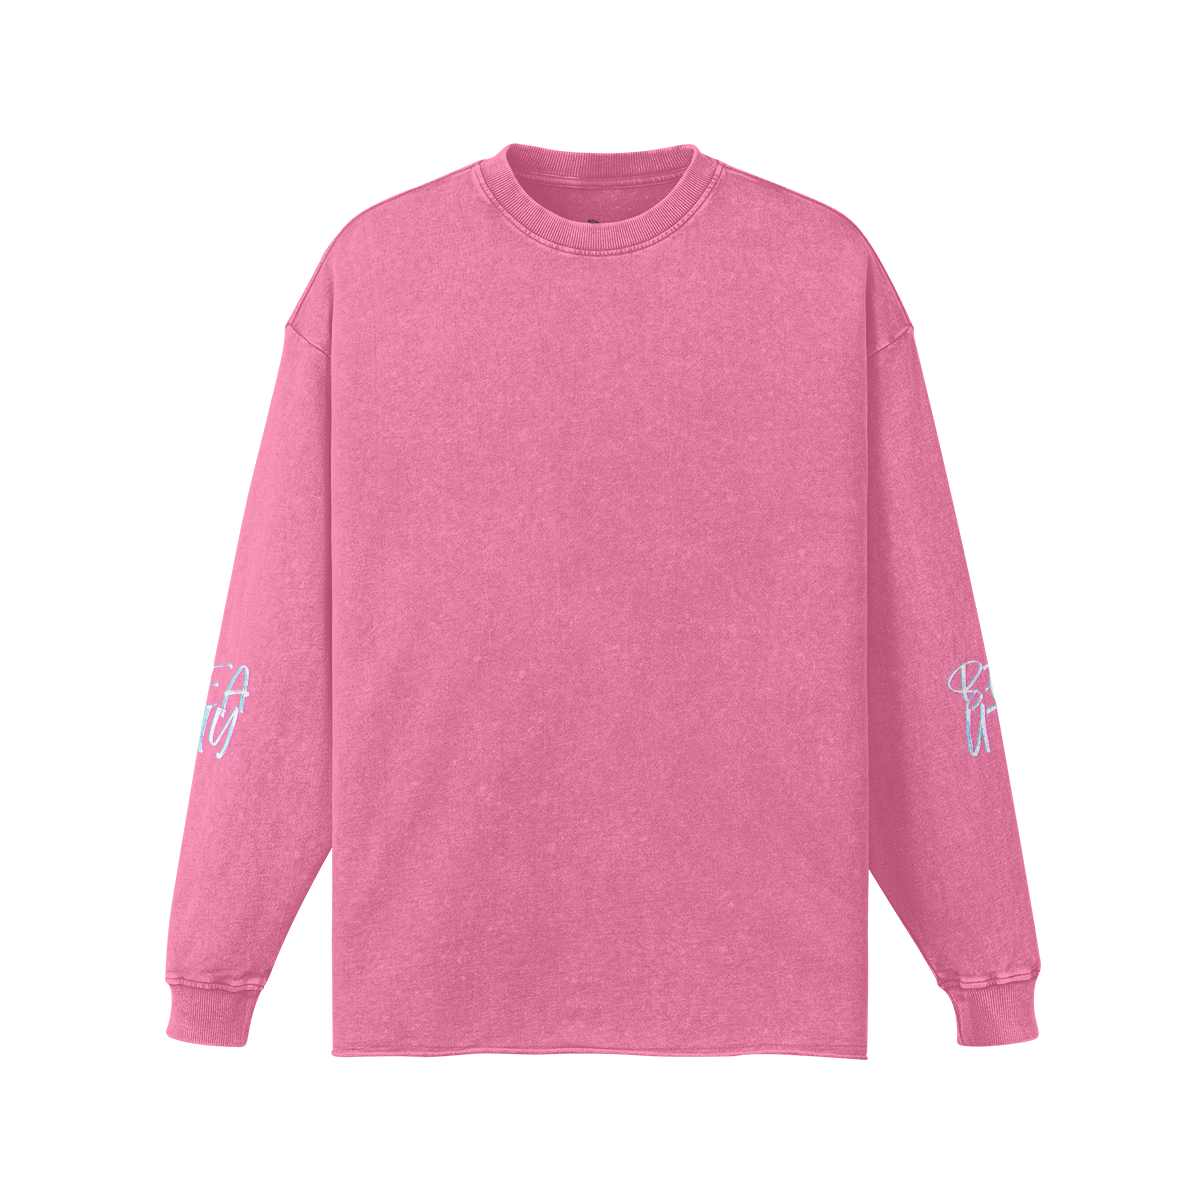 Pale Violet Red Beauty 260GSM Women's Raw Hem Faded Long Sleeve T-shirt | 100% Cotton - women's t-shirt at TFC&H Co.